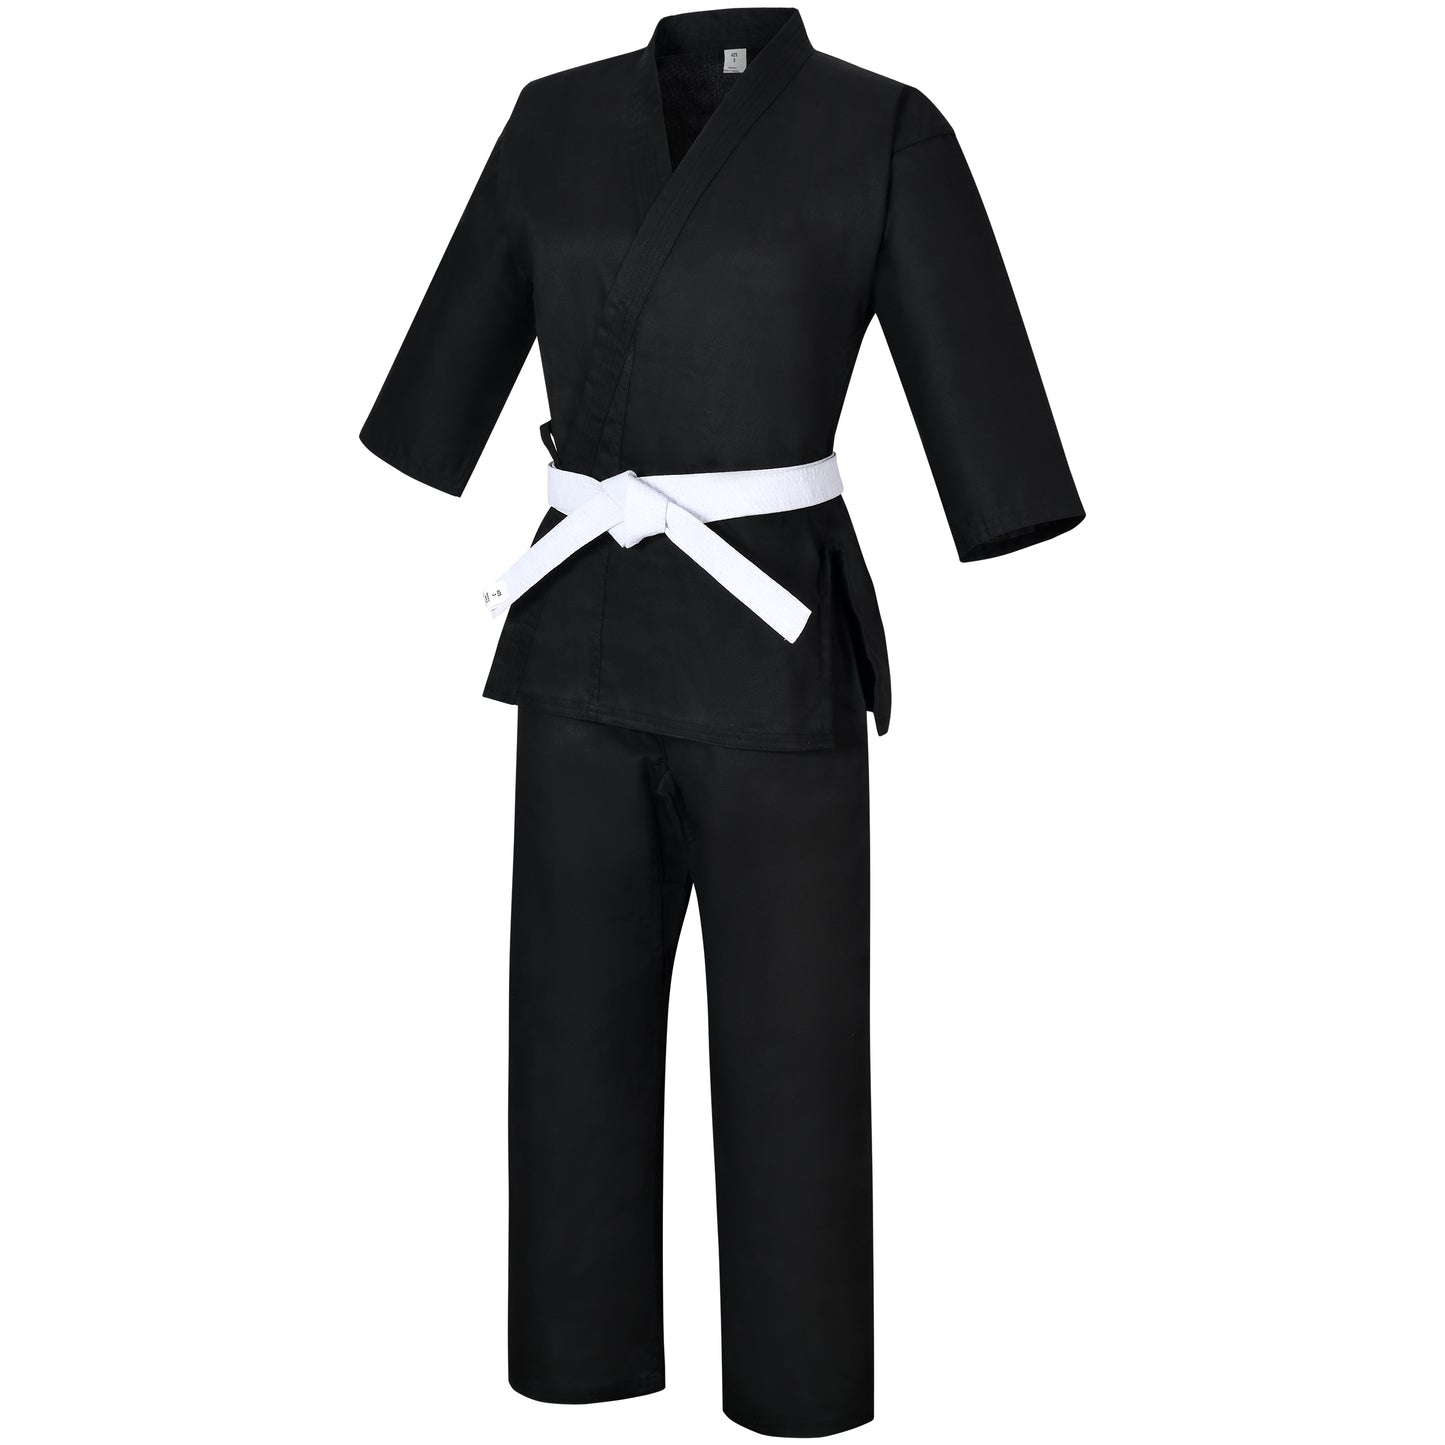 Karate Uniform 7.5oz Medium Weight For Kids & Adults Student Martial Arts Gi With Free White Belt